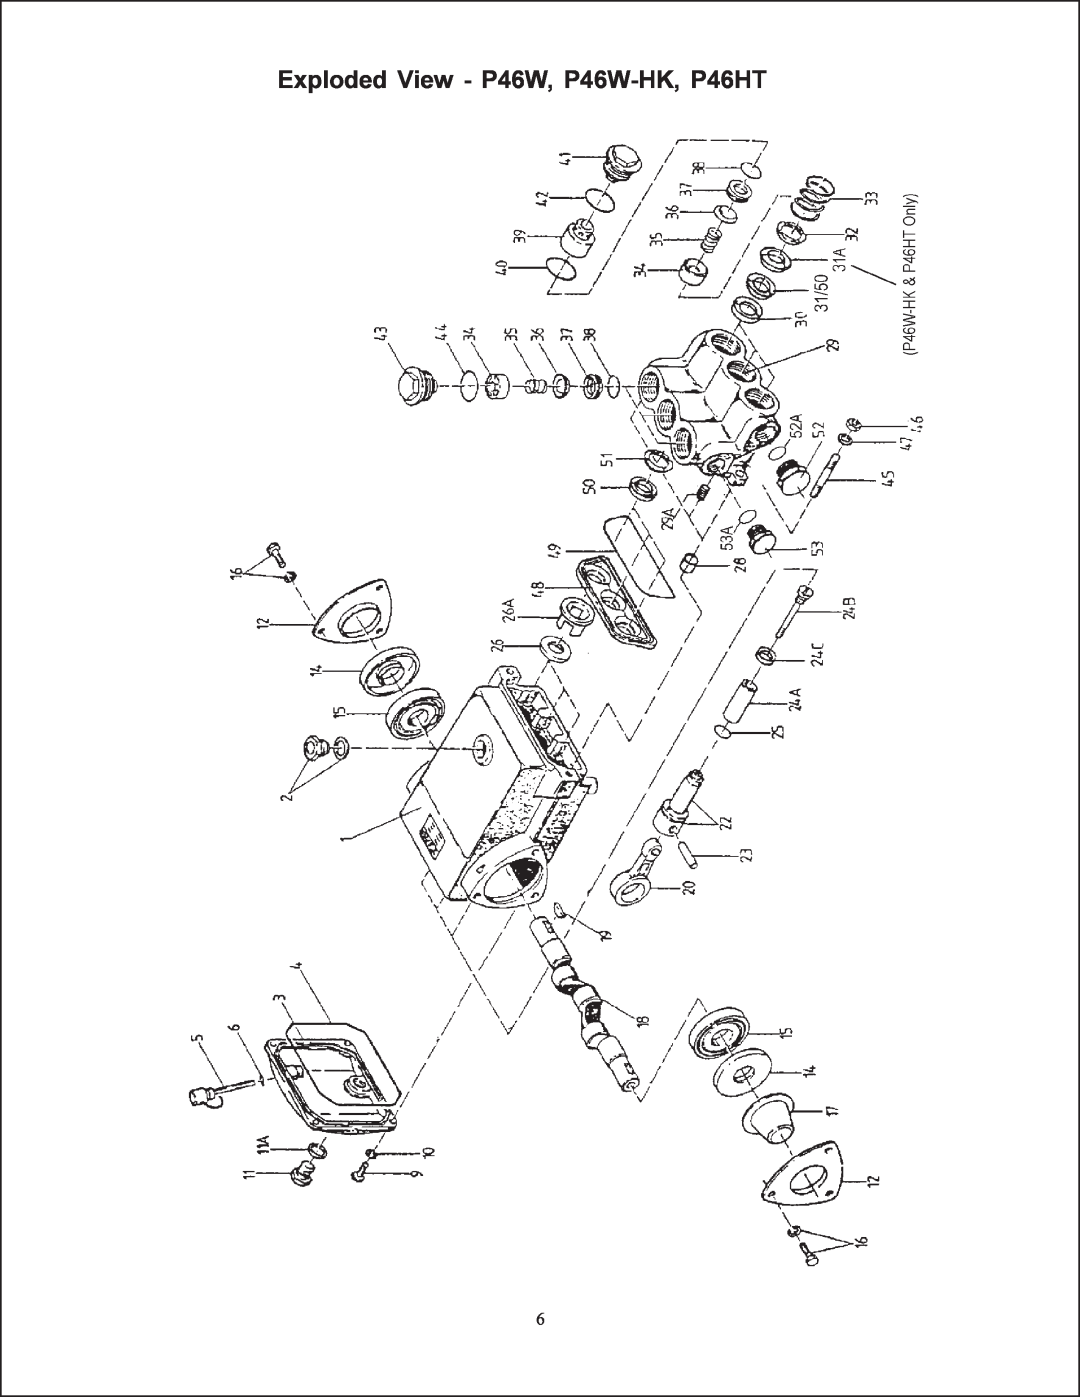 Giant p46w service manual Exploded View - P46W, P46W-HK, P46HT 